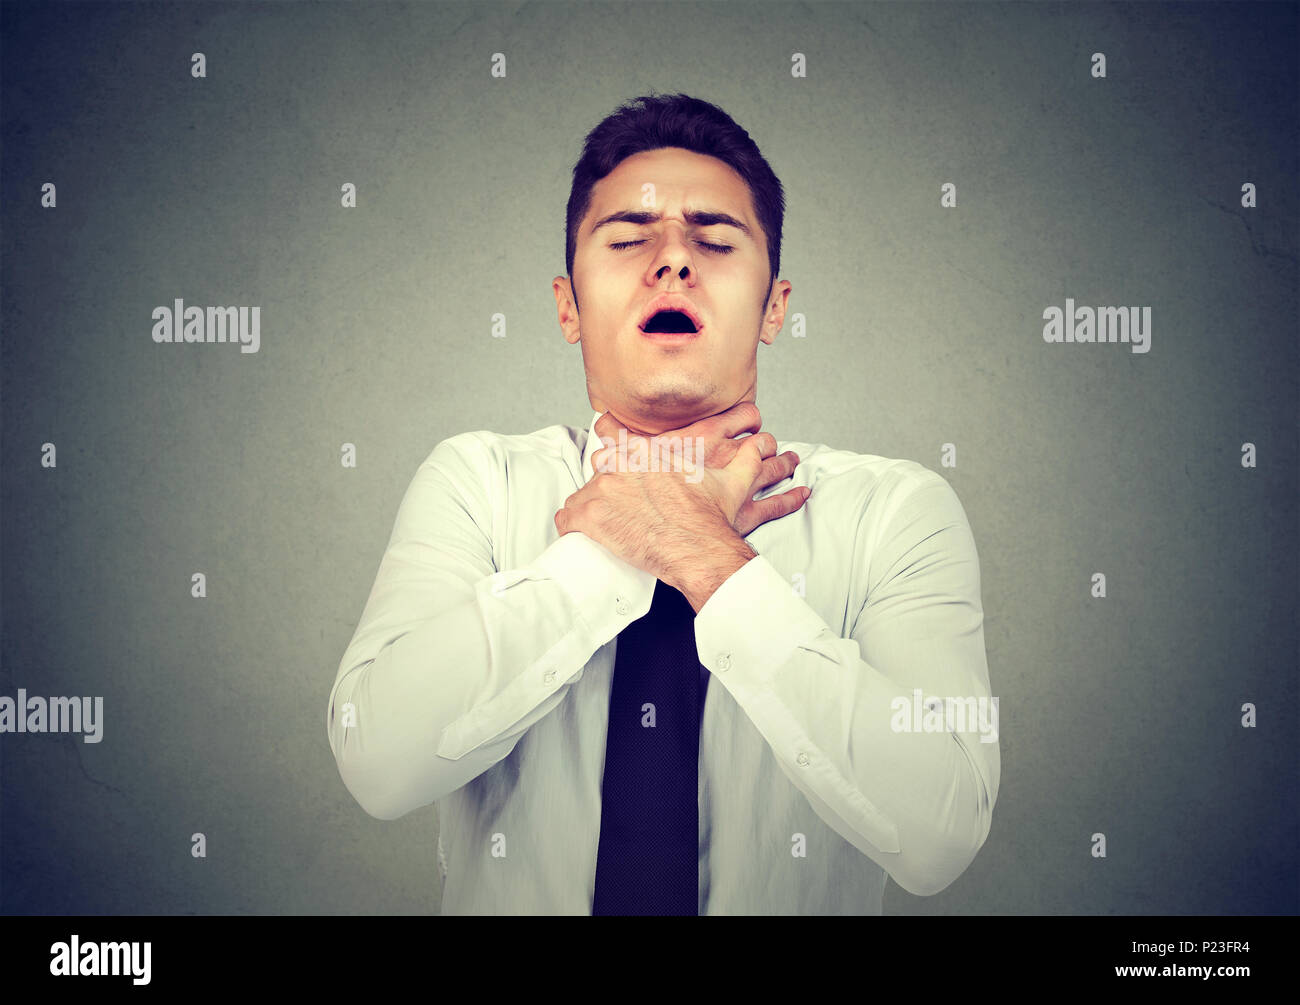 Young man having asthma attack or choking can't breath suffering from respiration problems isolated on gray background Stock Photo